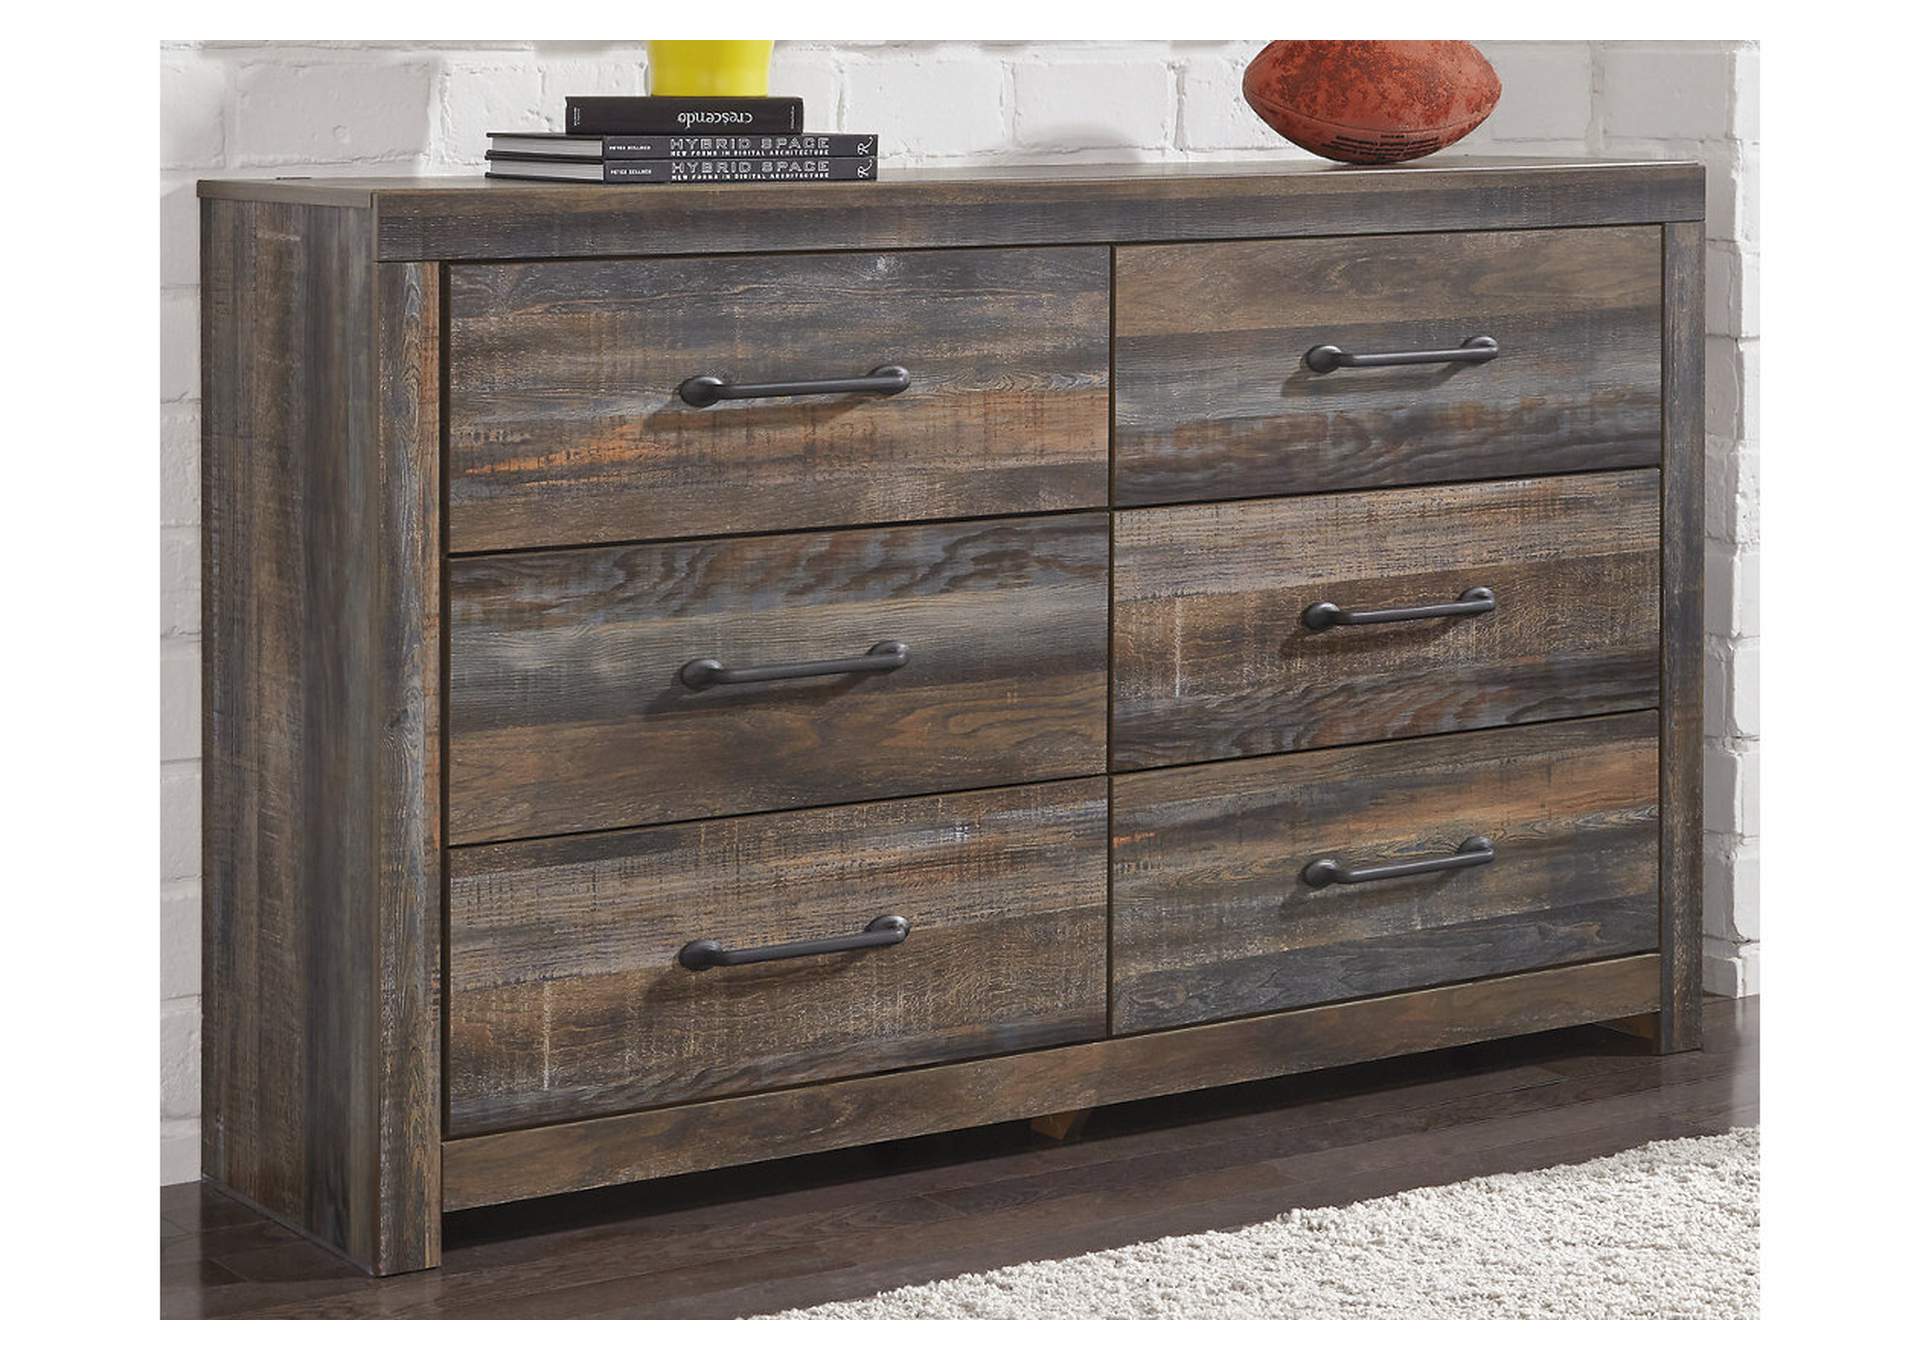 Drystan Full Panel Bed with 4 Storage Drawers with Dresser,Signature Design By Ashley